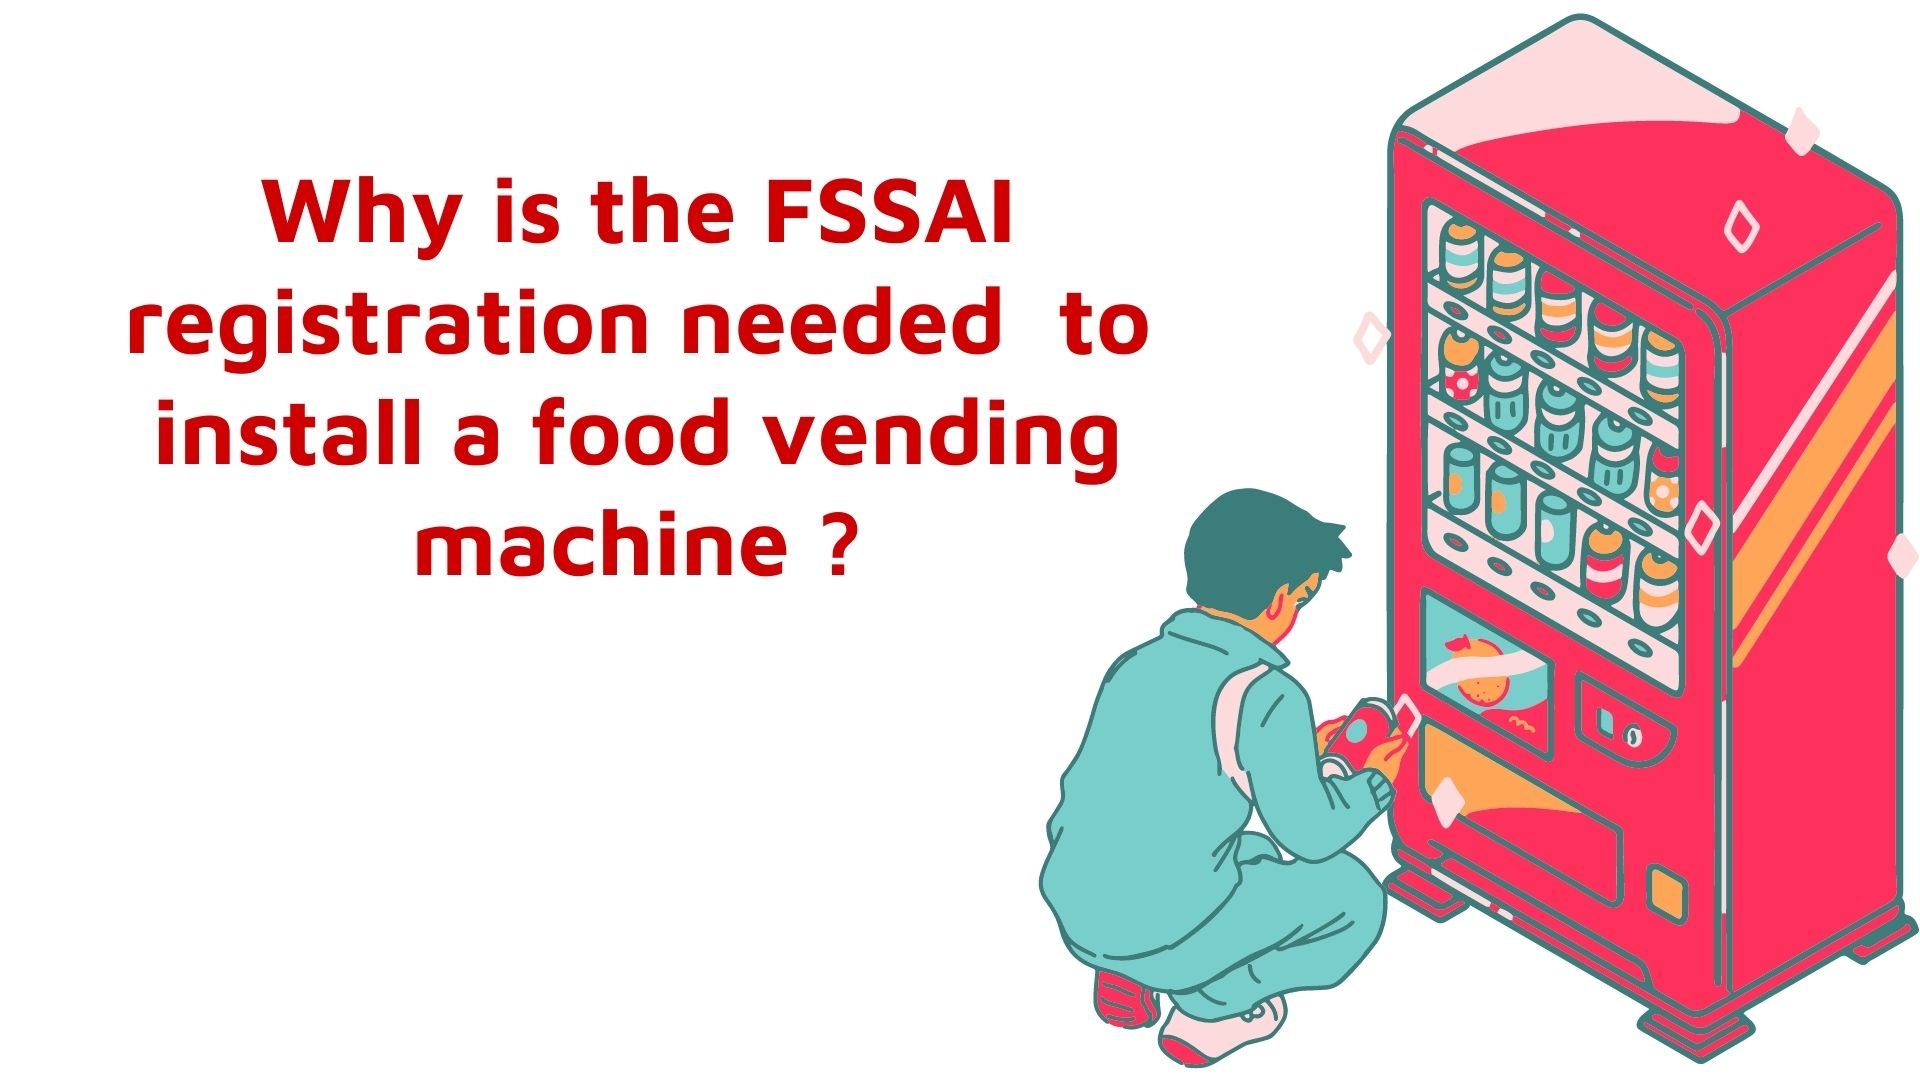 Why is the FSSAI registration needed to install a food vending machine